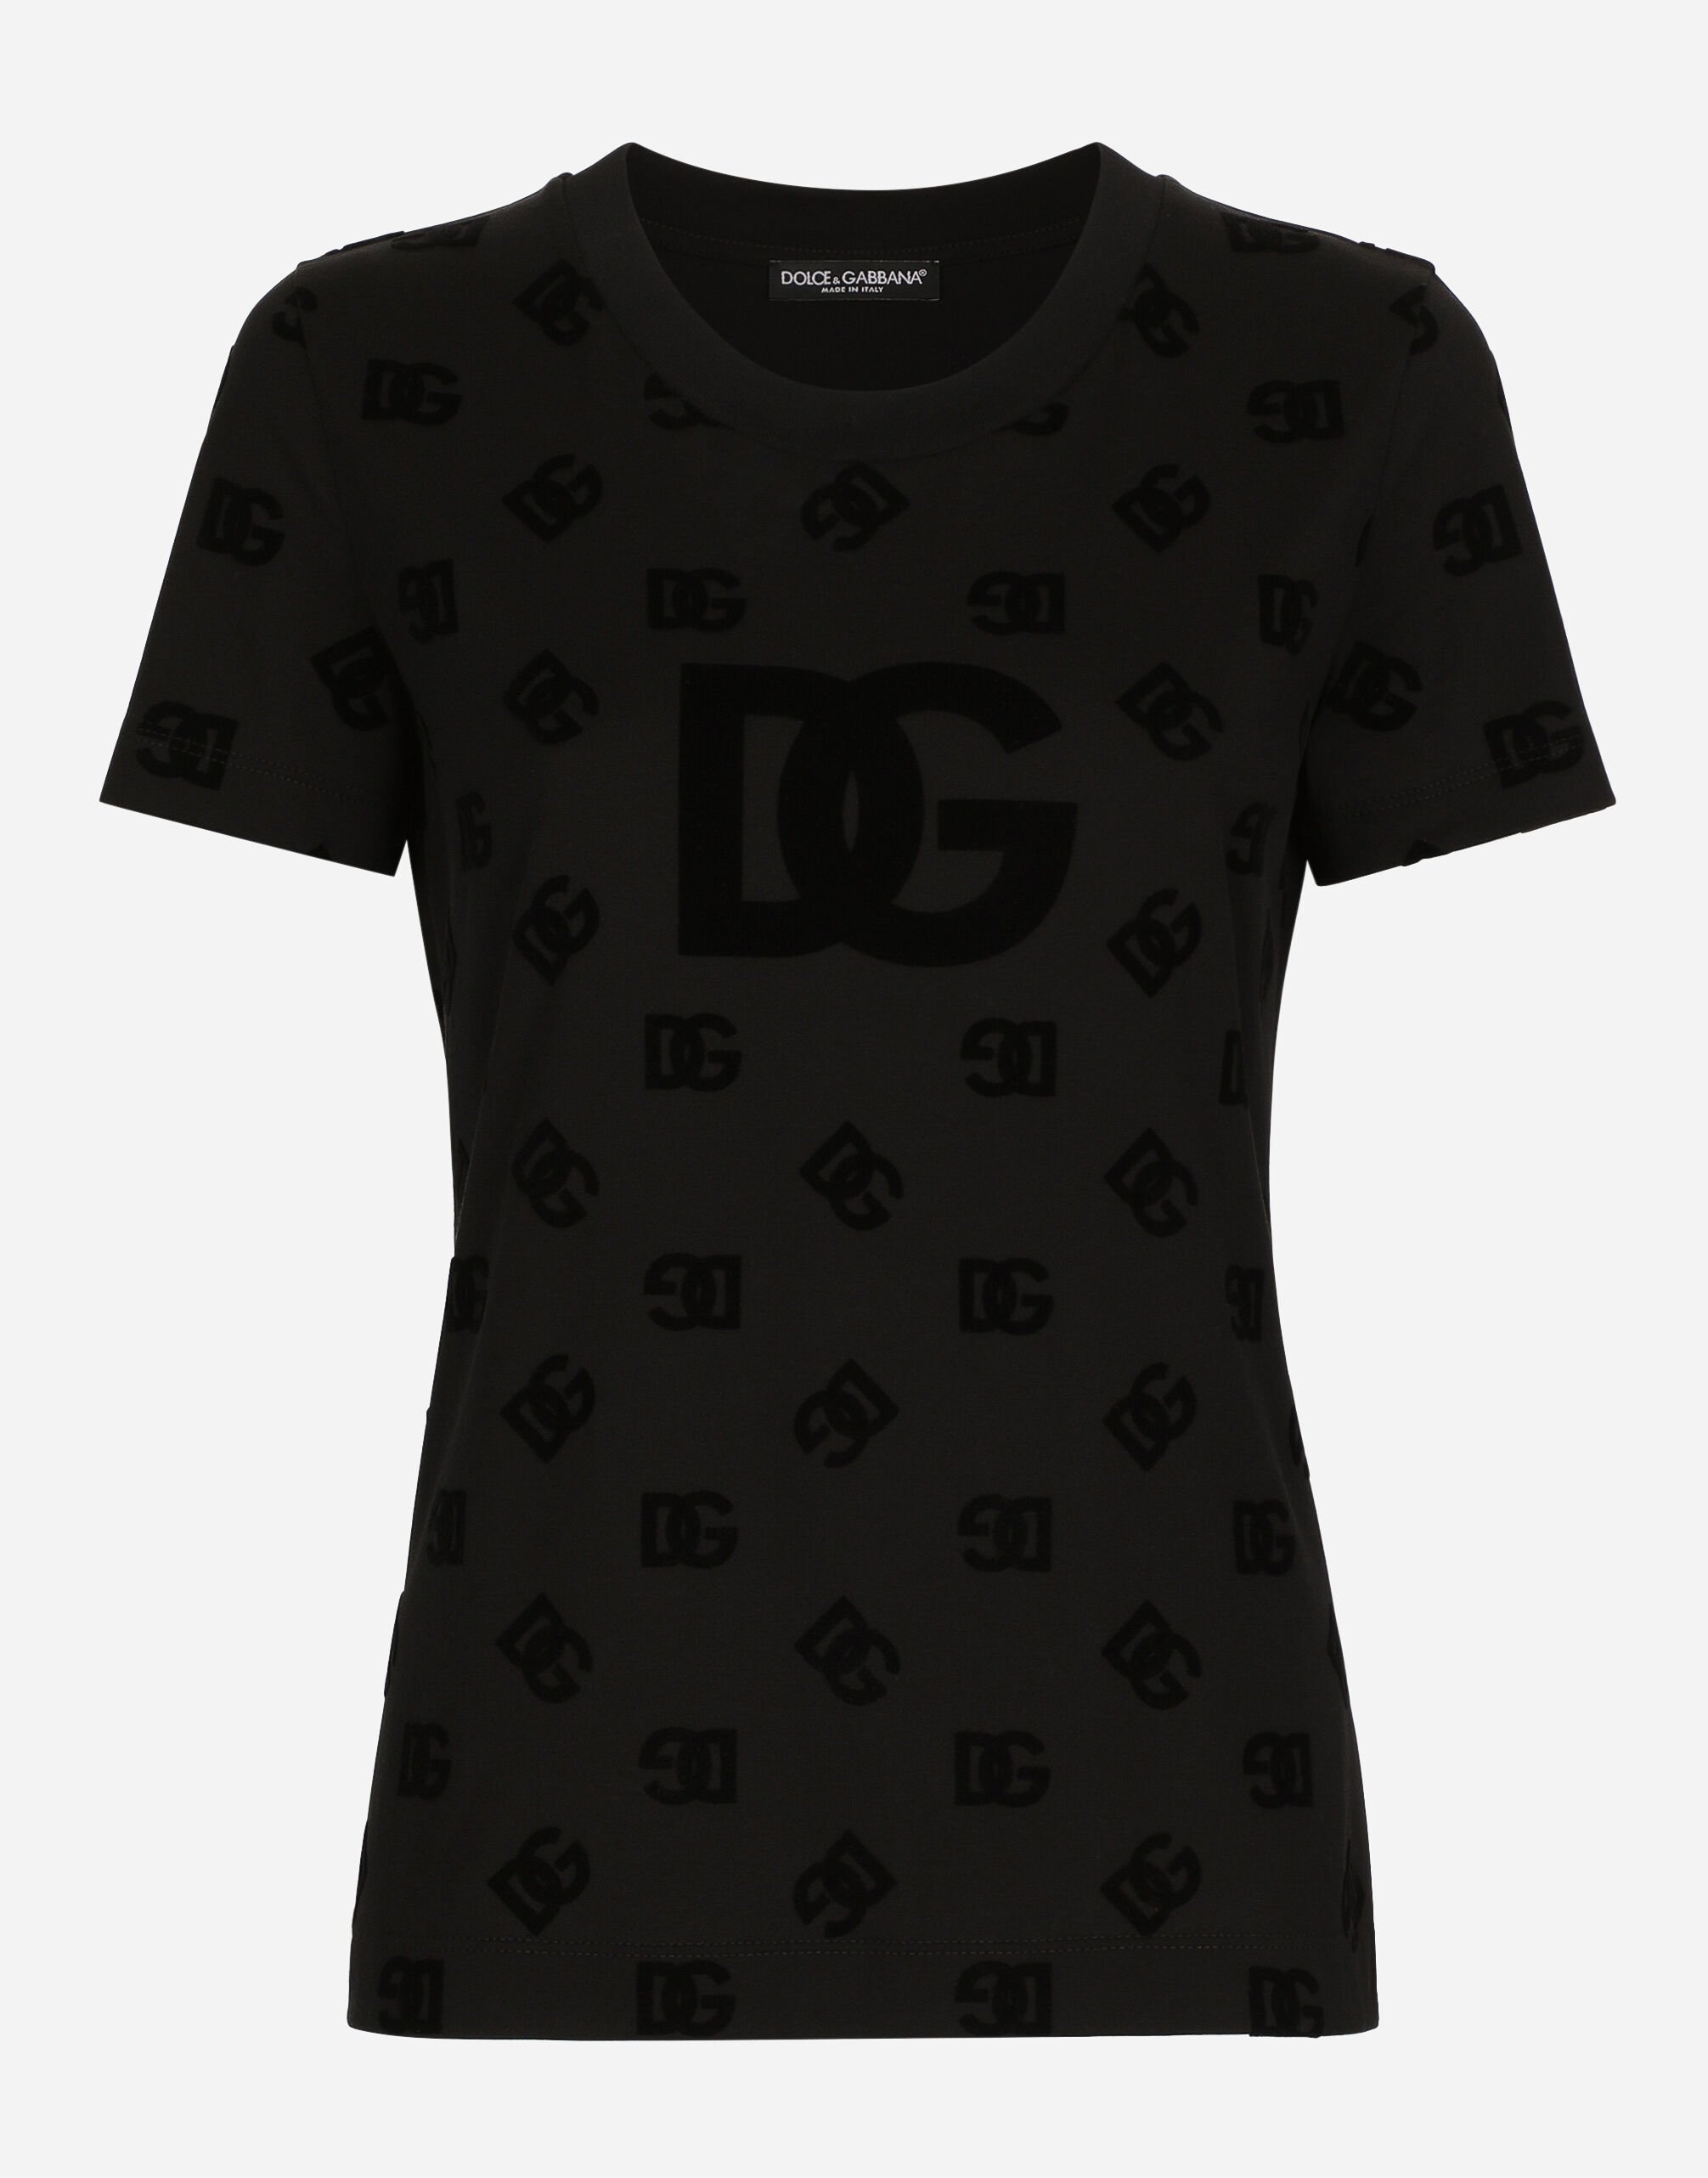 ${brand} Jersey T-shirt with all-over flocked DG logo ${colorDescription} ${masterID}